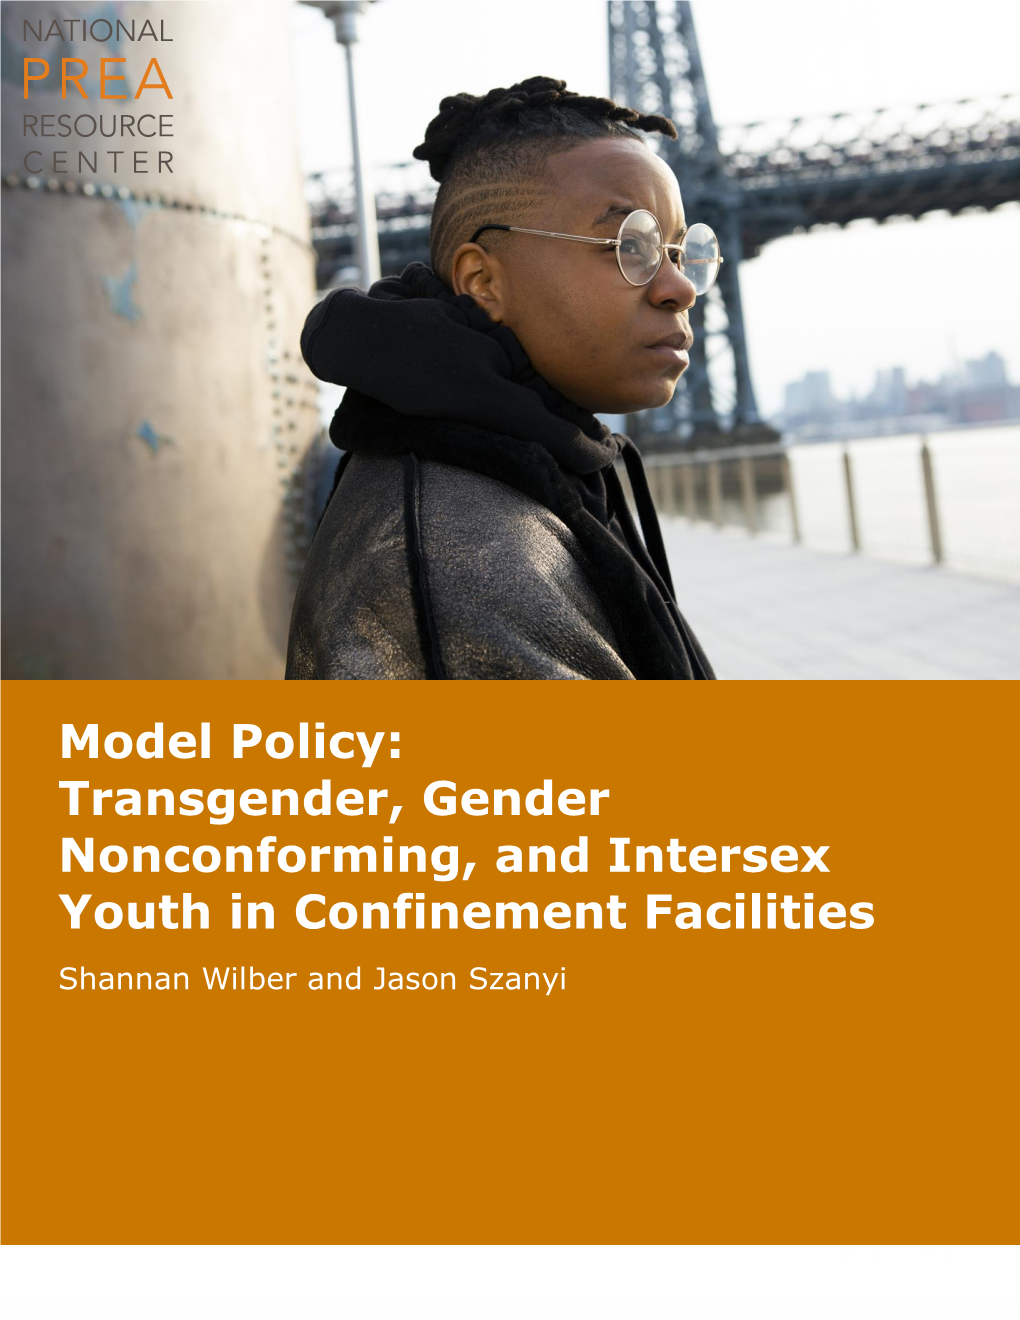 Model Policy: Transgender, Gender Nonconforming, and Intersex Youth in Confinement Facilities Shannan Wilber and Jason Szanyi